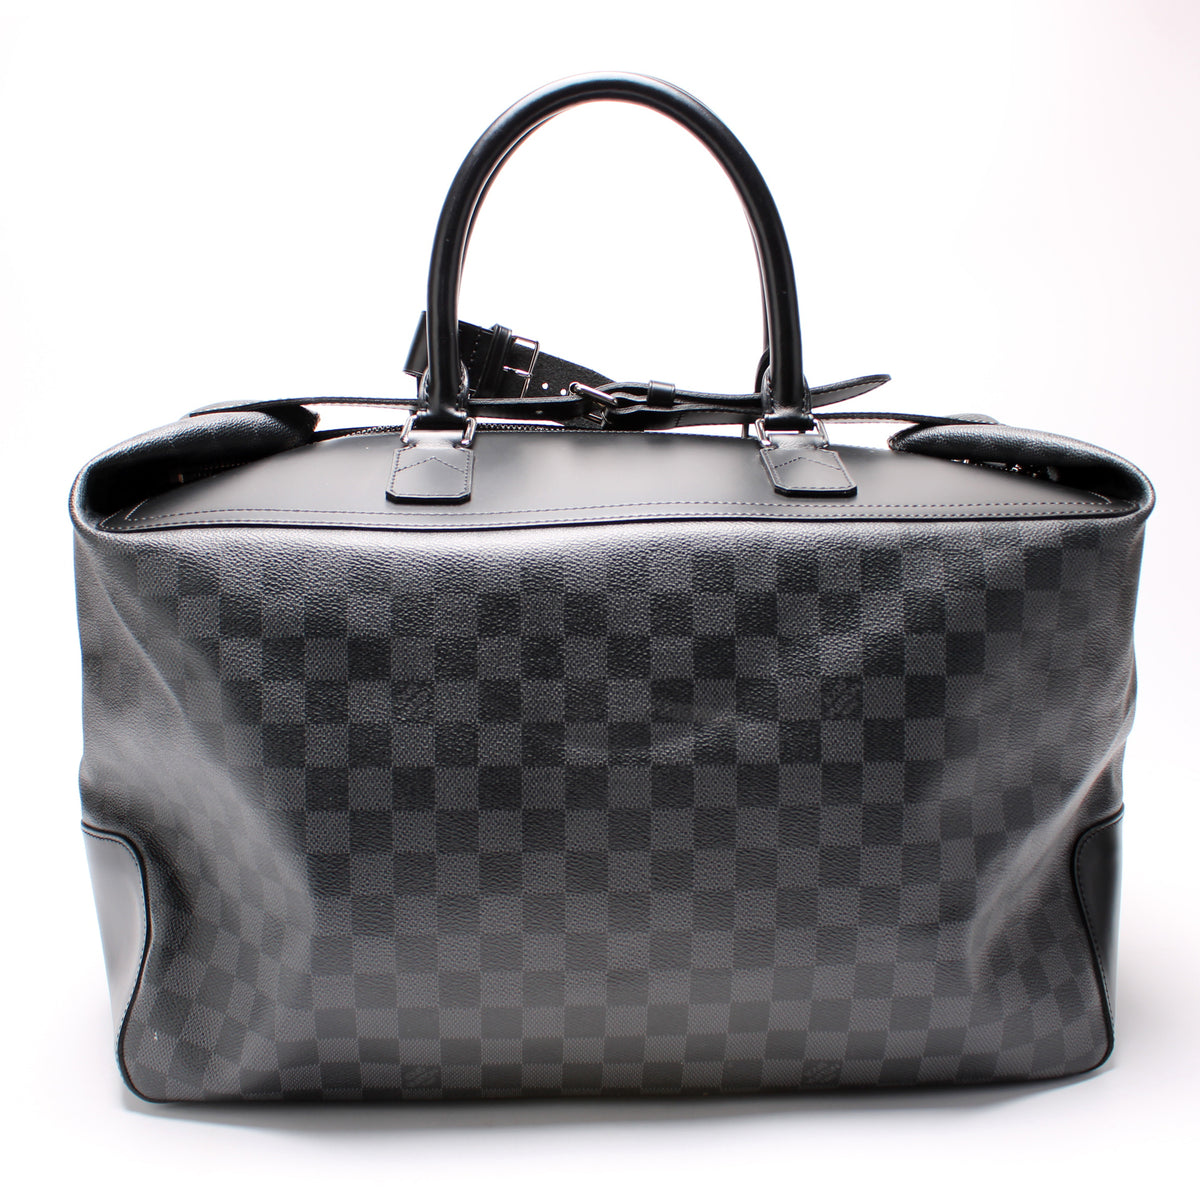 Louis Vuitton Damier Graphite Neo Greenwich - Black Carry-Ons, Luggage -  LOU775585